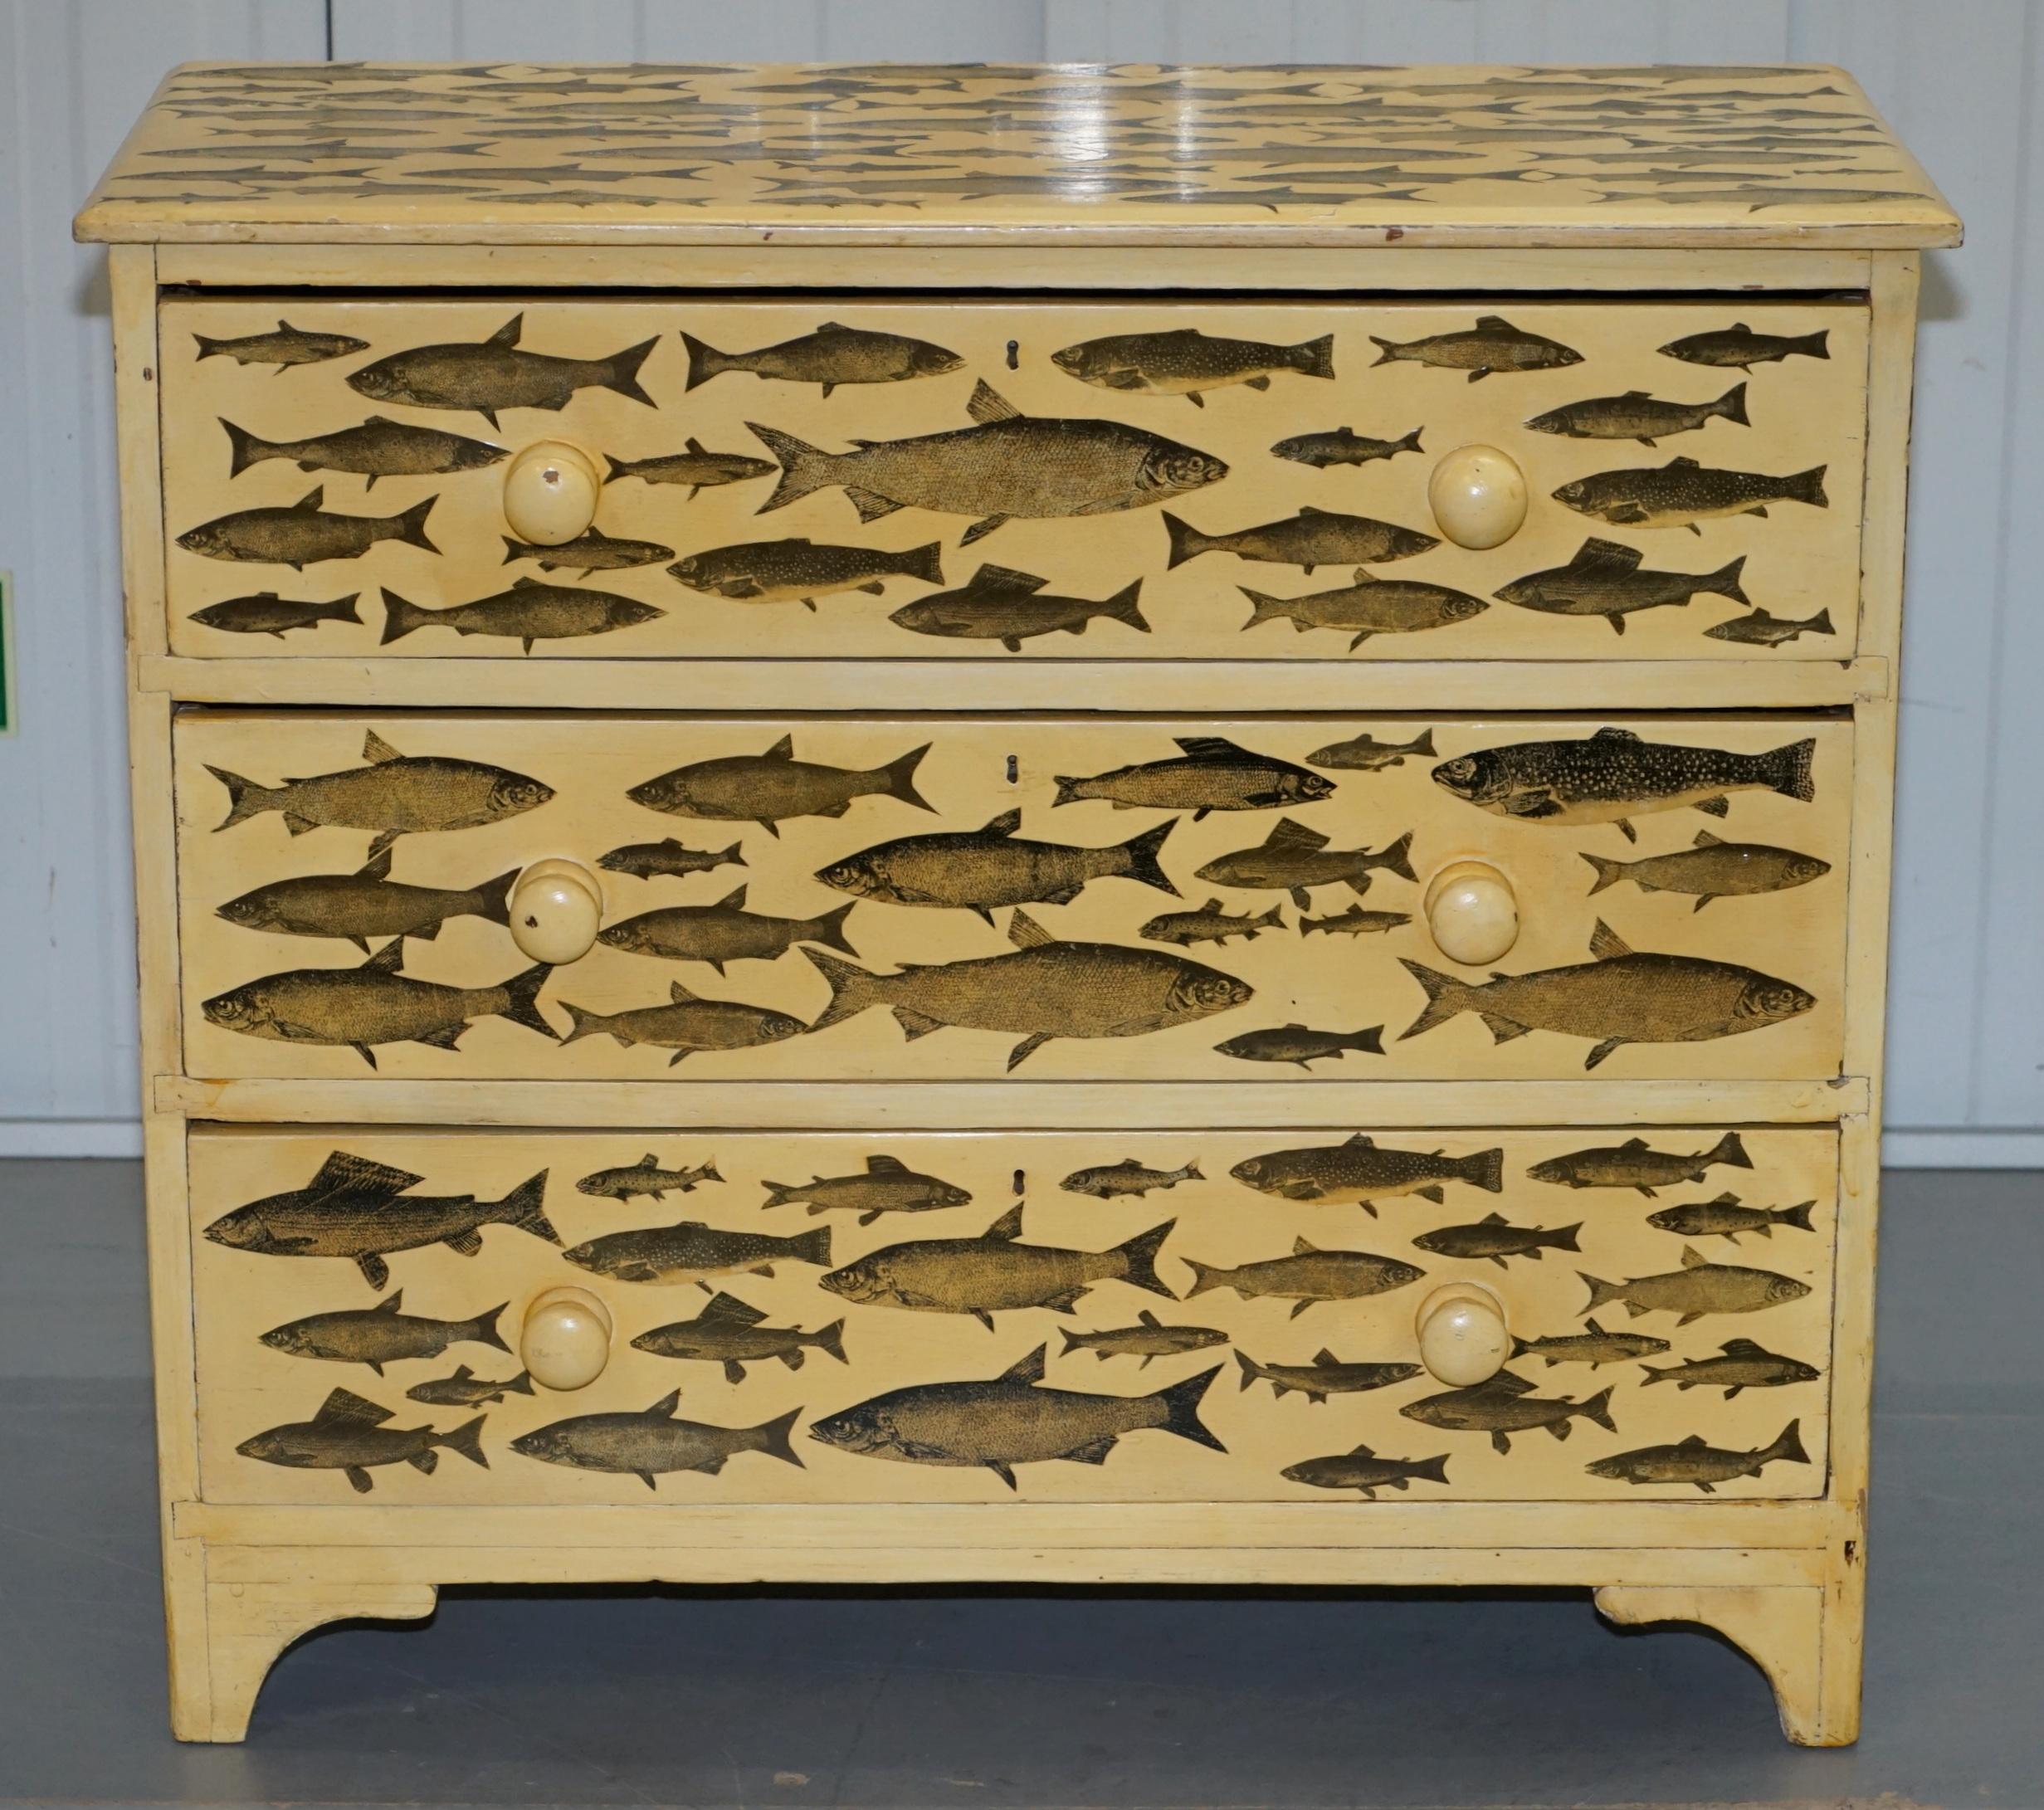 We are delighted to this stunning original Victorian 19th century hand made Chest of drawers retailed through Liberty’s London with original paint and fish decoupage pictures

A very decorative piece, these almost never come up for sale as they